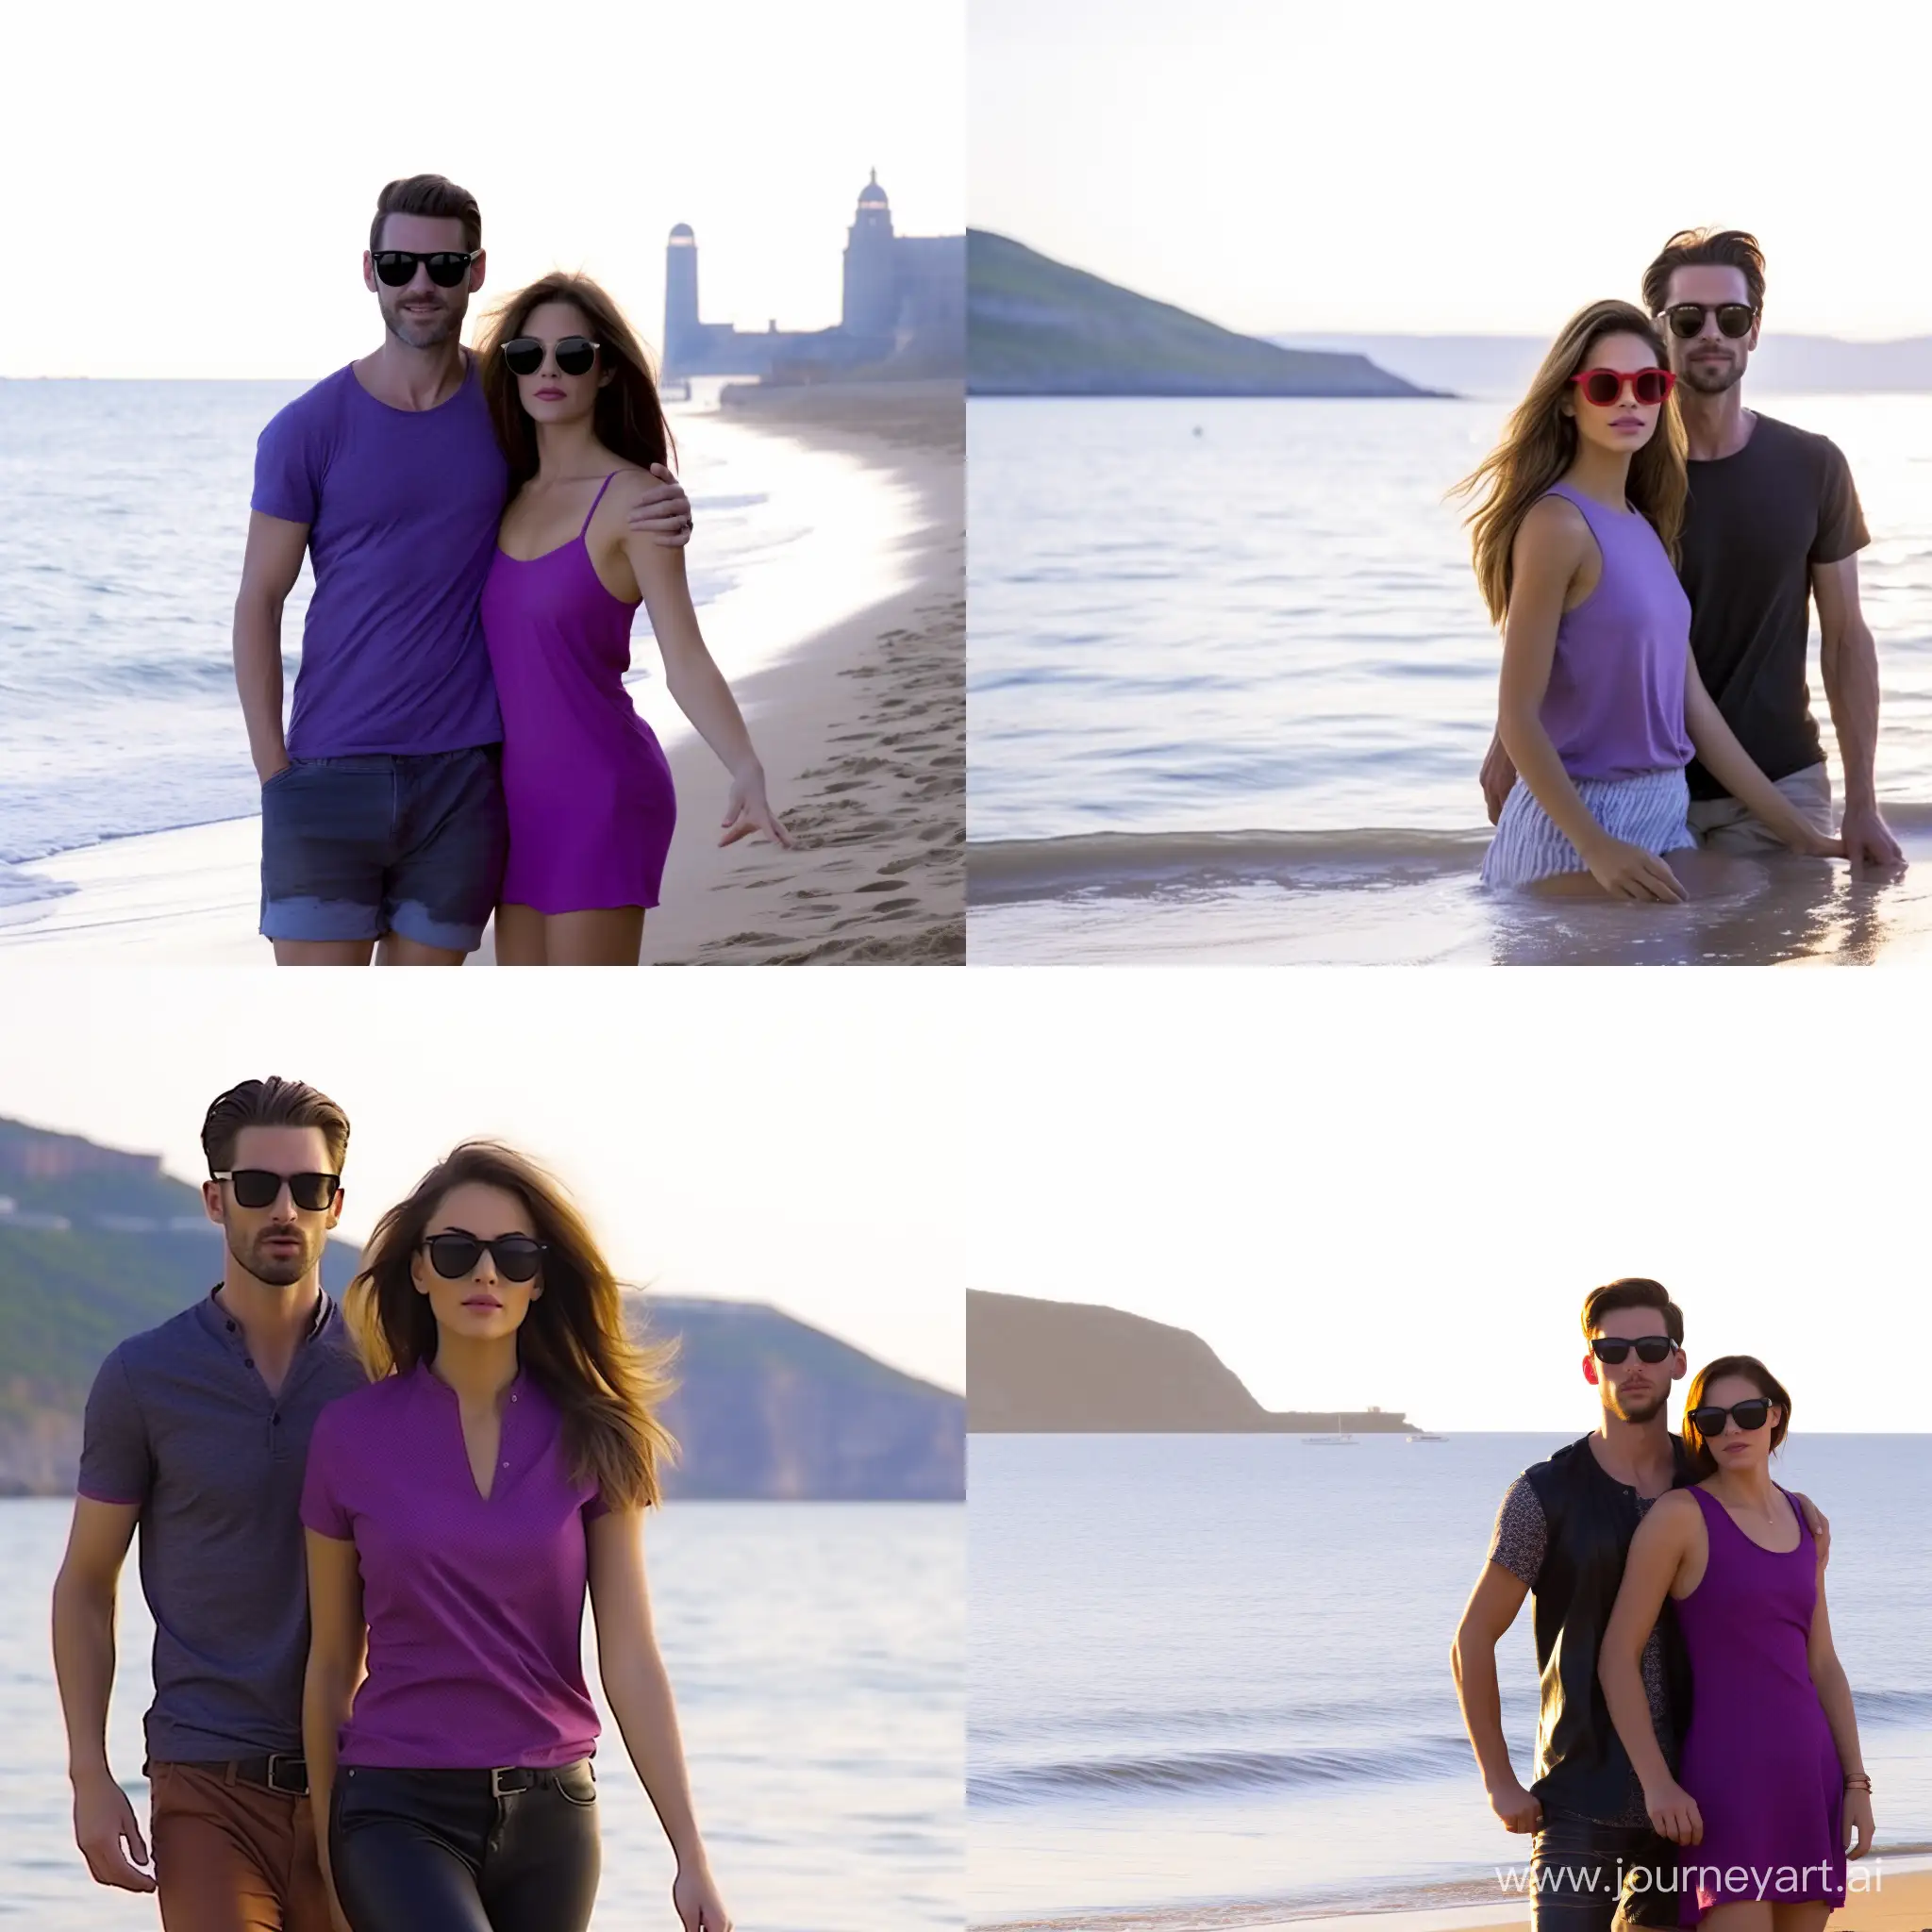 group closeup photo or thee russian guys in a red neon undershirt and one russian brunet girl in a purple top use sunglasses and sport shrt, standing onthe beach against the backgroung of the sea, daylight, smiling, in love, sporty people